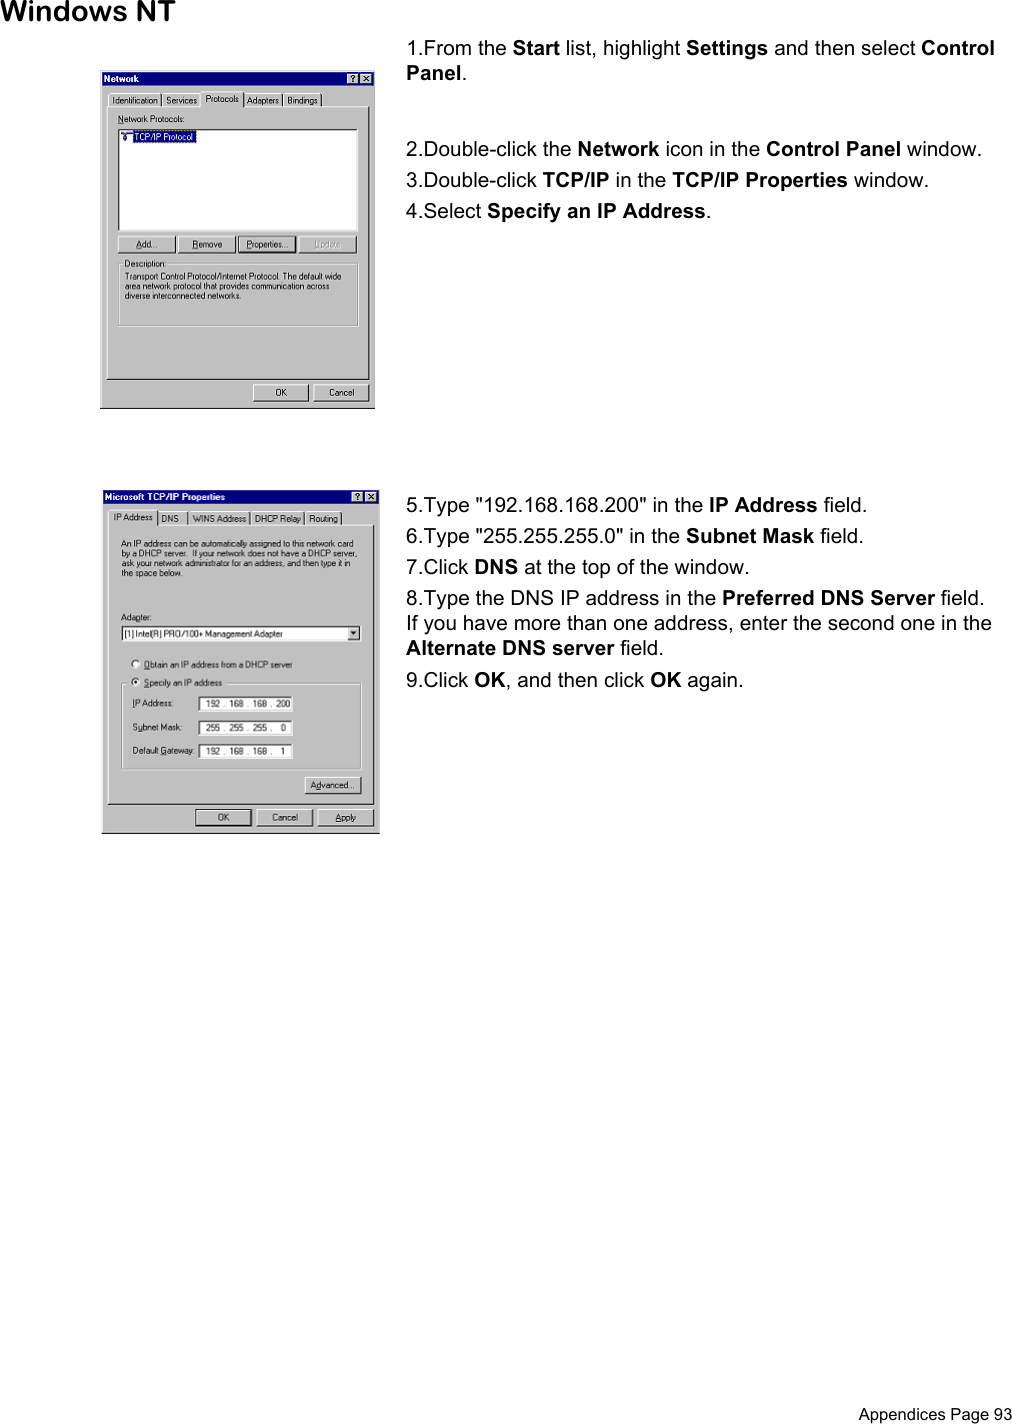  Appendices Page 93Windows NT1.From the Start list, highlight Settings and then select Control Panel.2.Double-click the Network icon in the Control Panel window.3.Double-click TCP/IP in the TCP/IP Properties window.4.Select Specify an IP Address.5.Type &quot;192.168.168.200&quot; in the IP Address field.6.Type &quot;255.255.255.0&quot; in the Subnet Mask field.7.Click DNS at the top of the window. 8.Type the DNS IP address in the Preferred DNS Server field. If you have more than one address, enter the second one in the Alternate DNS server field. 9.Click OK, and then click OK again. 